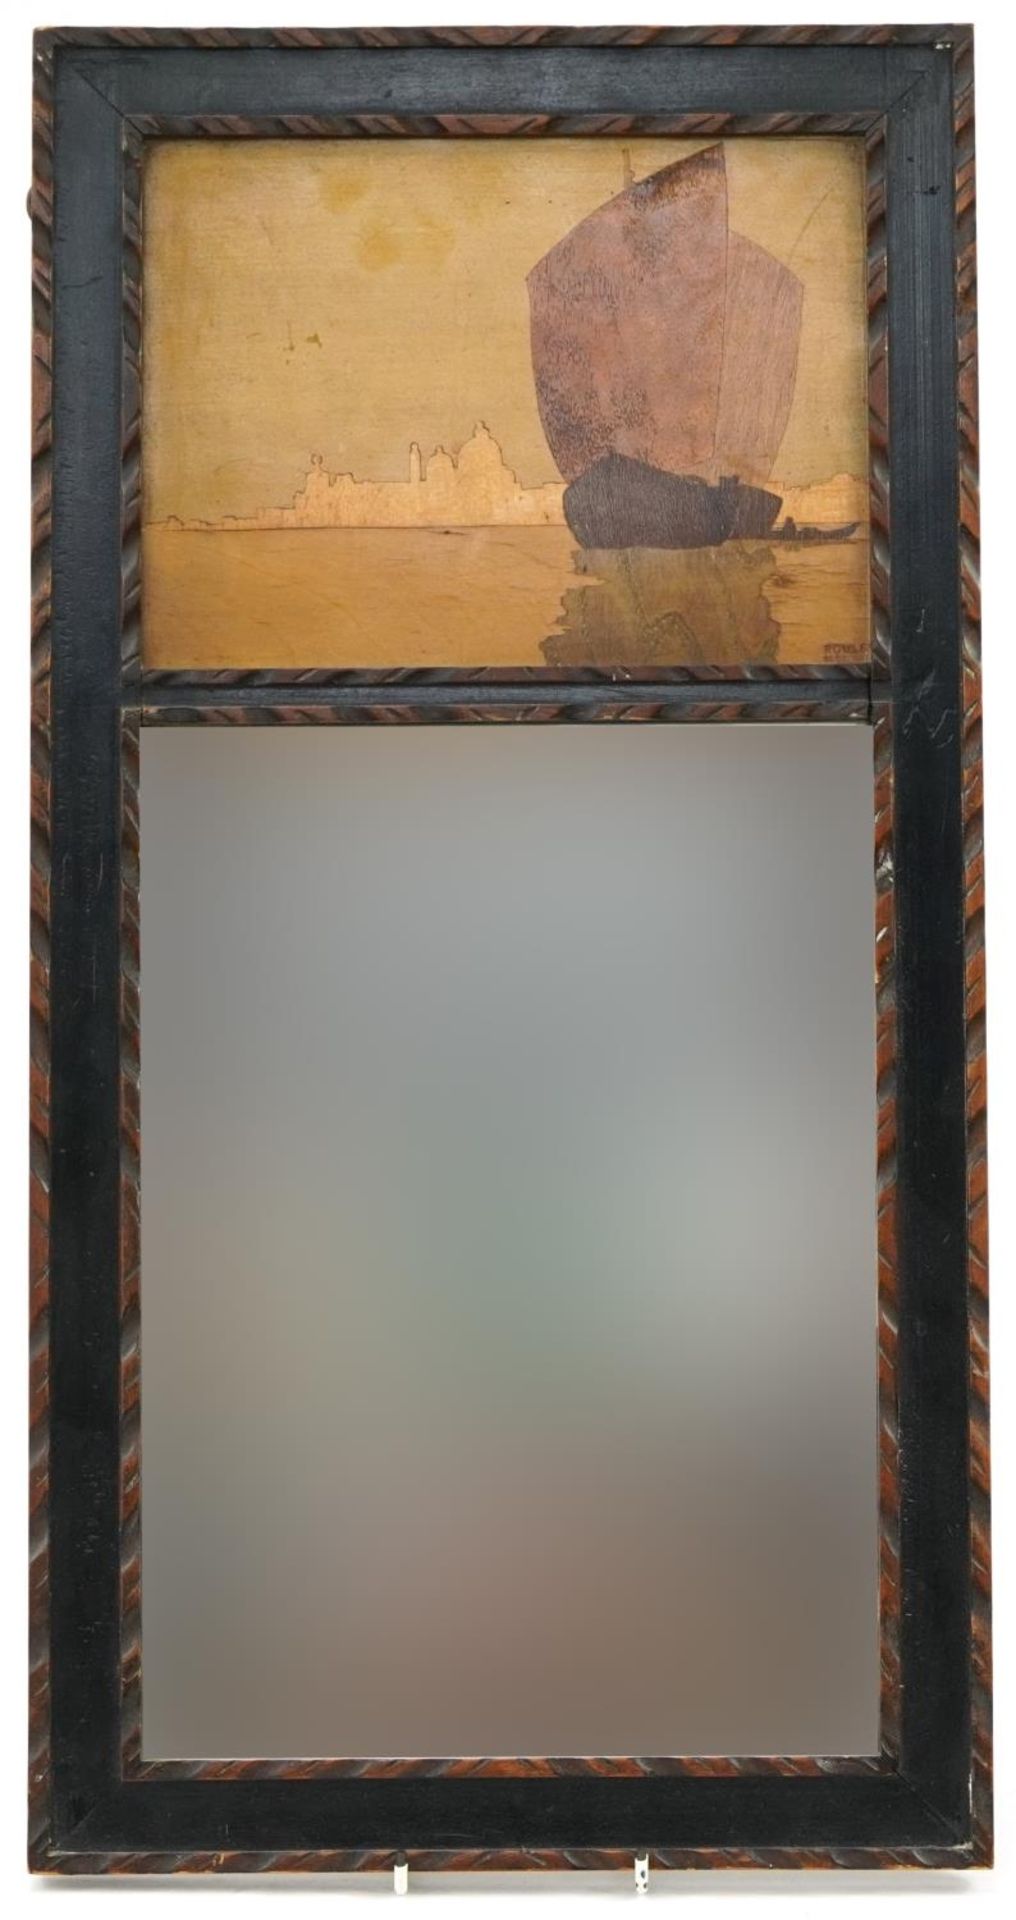 Rowley Gallery, Arts & Crafts rectangular wall mirror with wooden marquetry panel inlaid with a